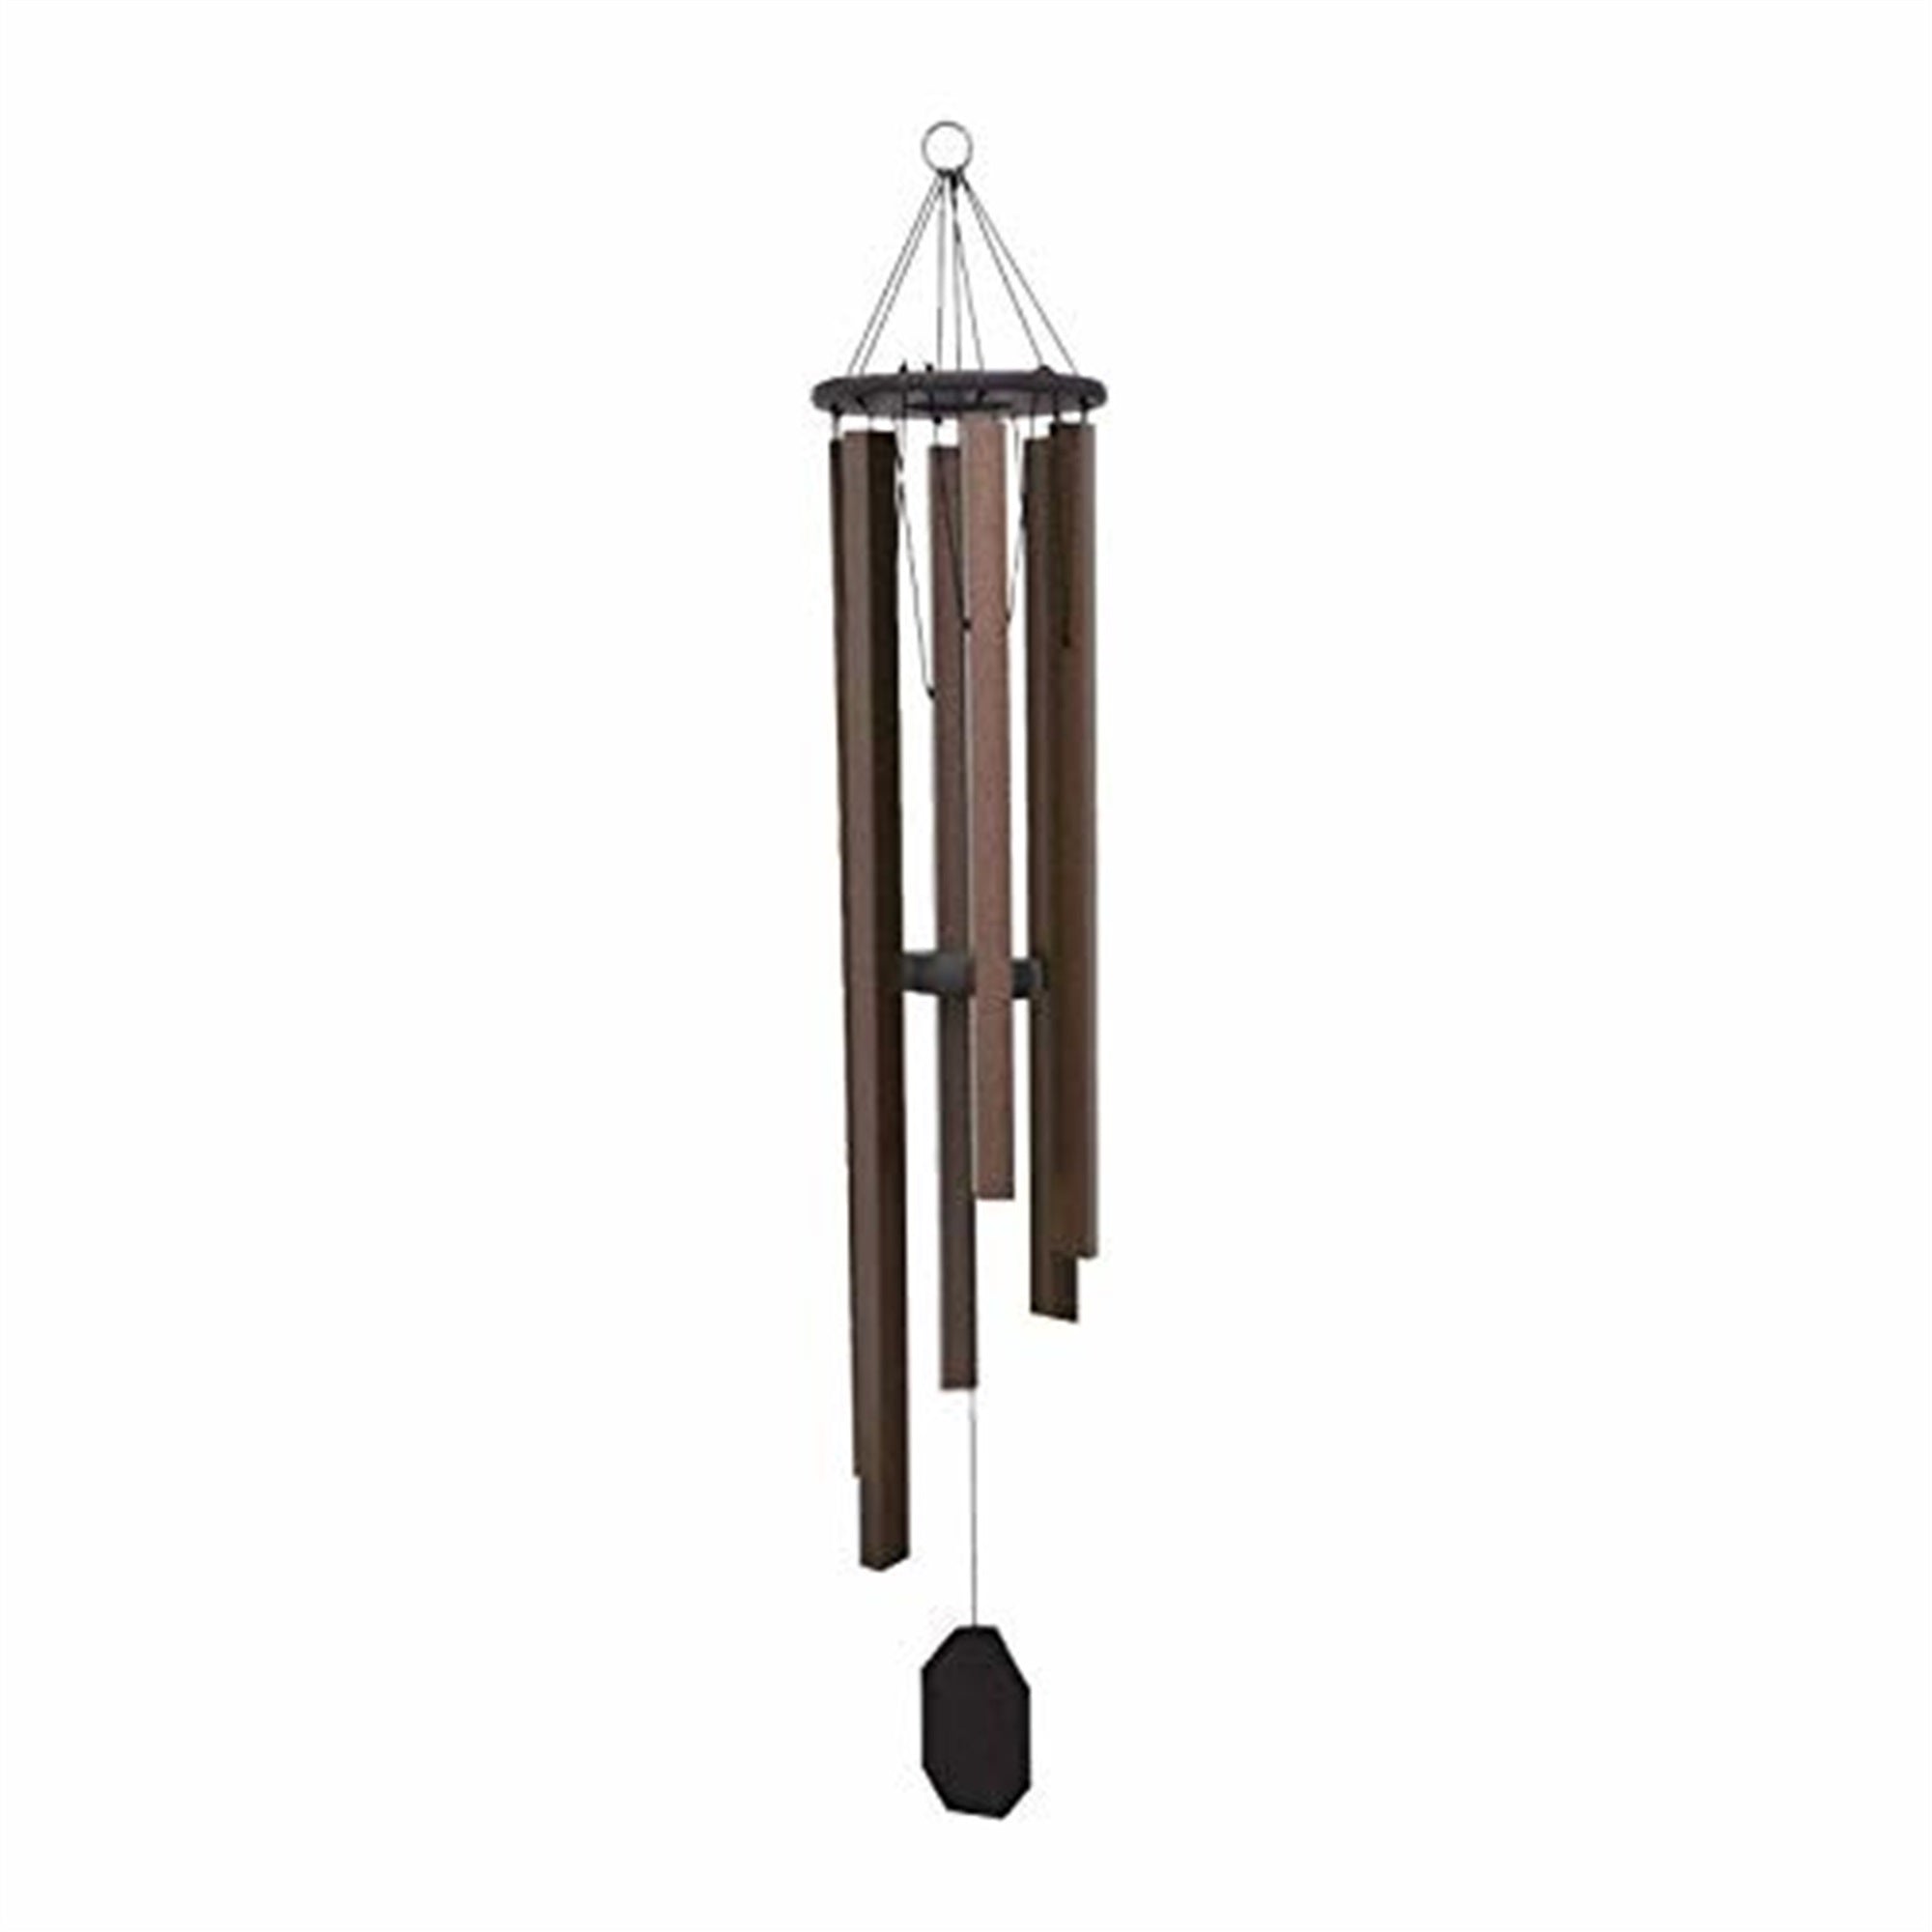 Lambright Country Charms Mountain Serenade Wind Chime - Amish Handcrafted, 42"